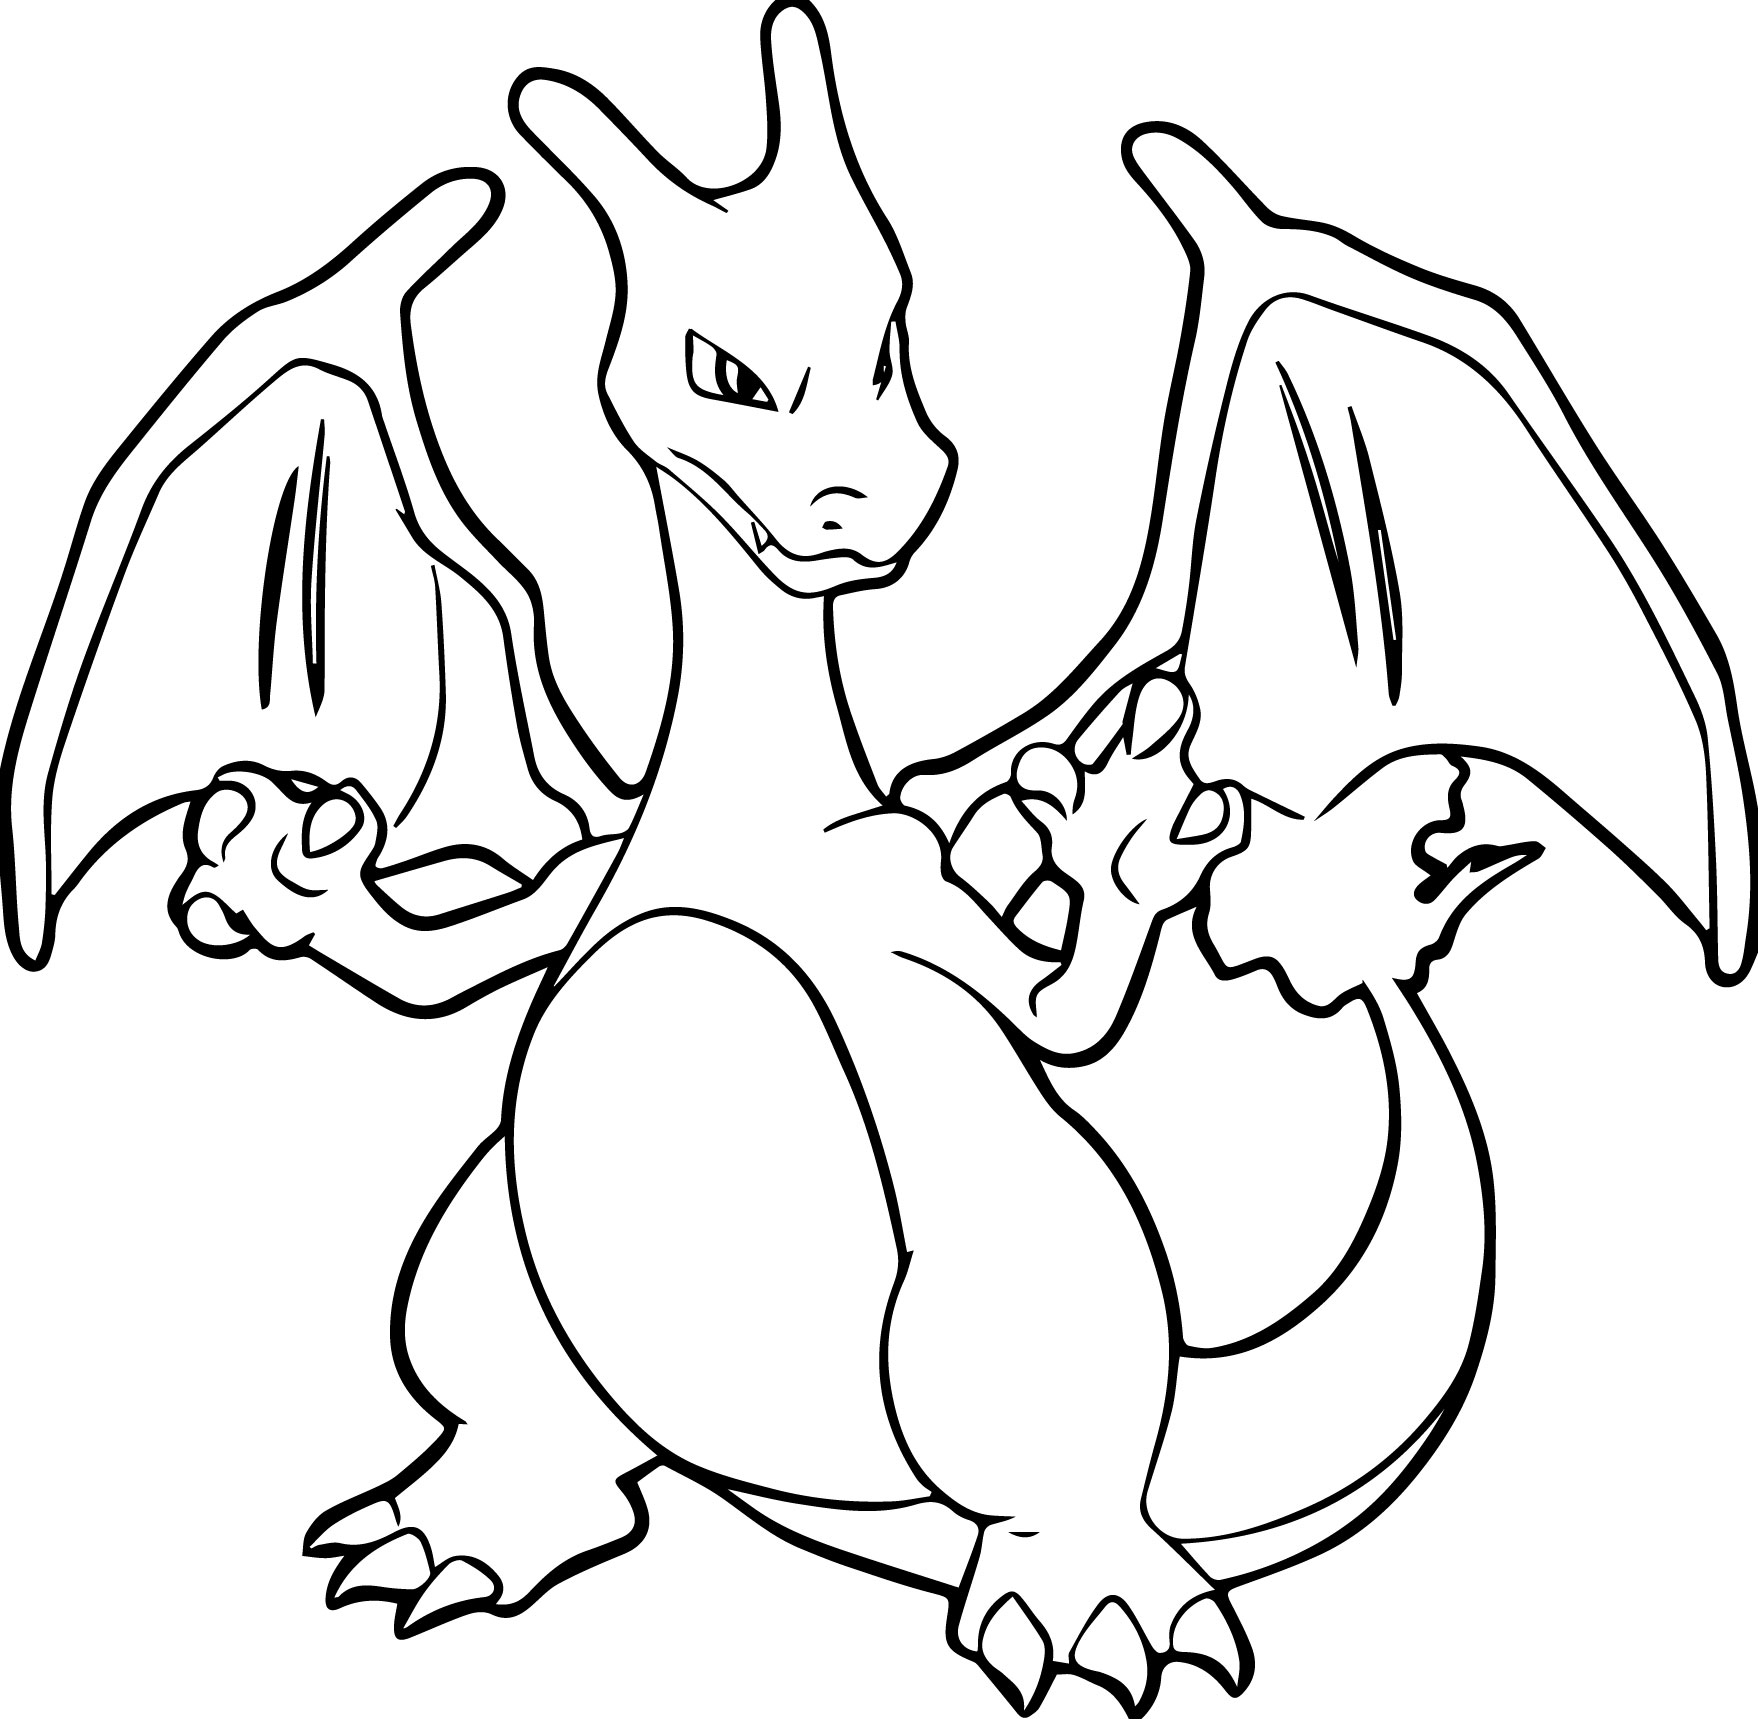 Printable Charizard Coloring Pages - Charizard Coloring Pages